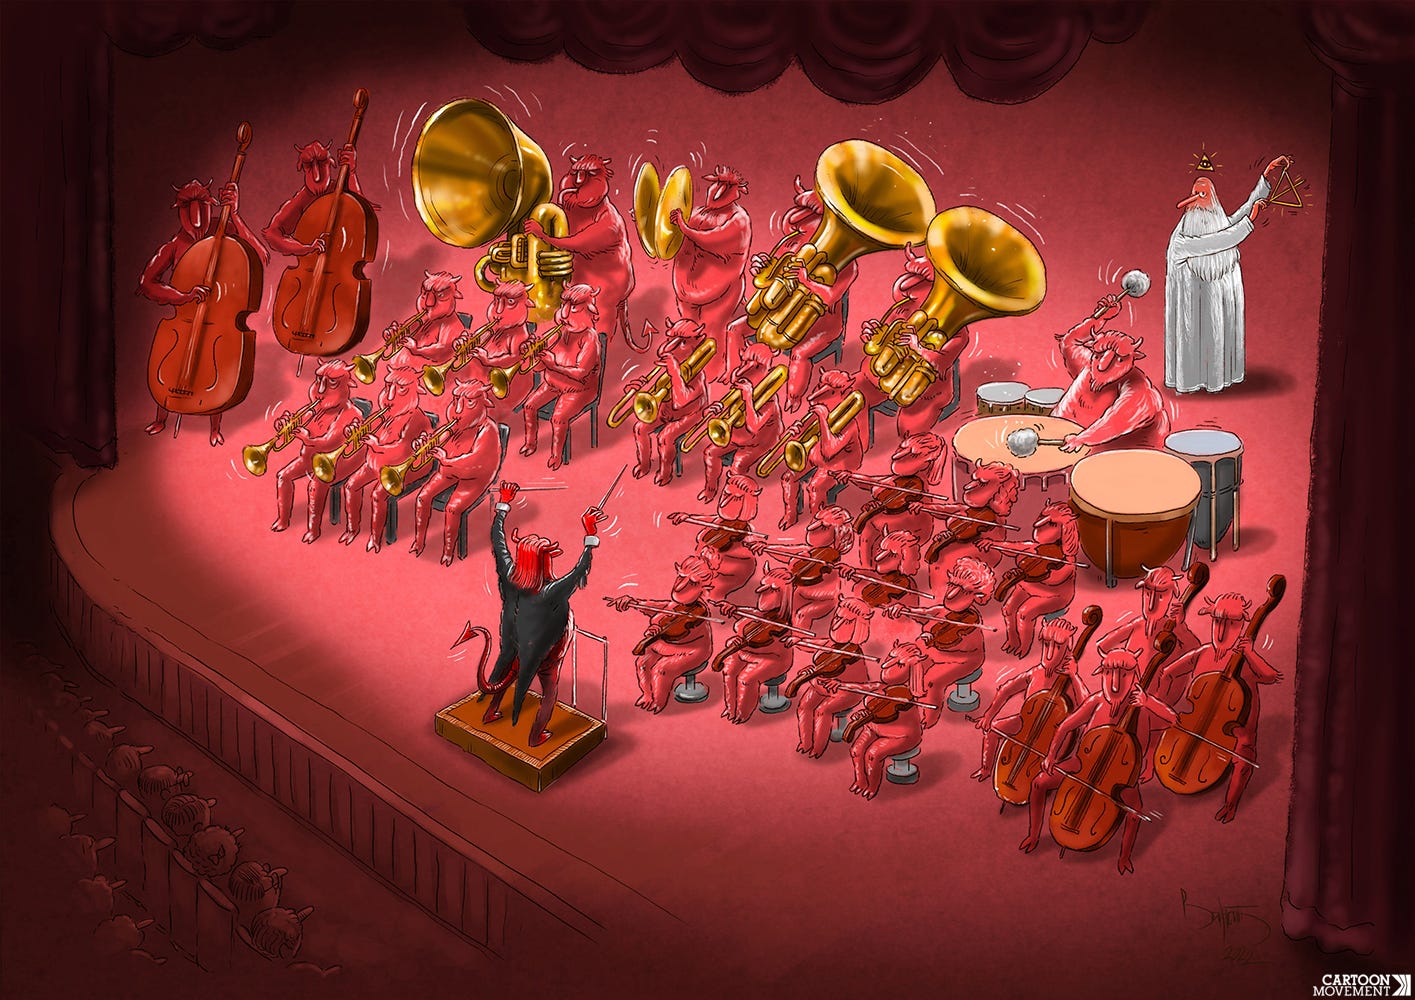 Cartoon showing a big orchestra of devils playing a symphony on a stage. At the back, we see God playing the triangle.